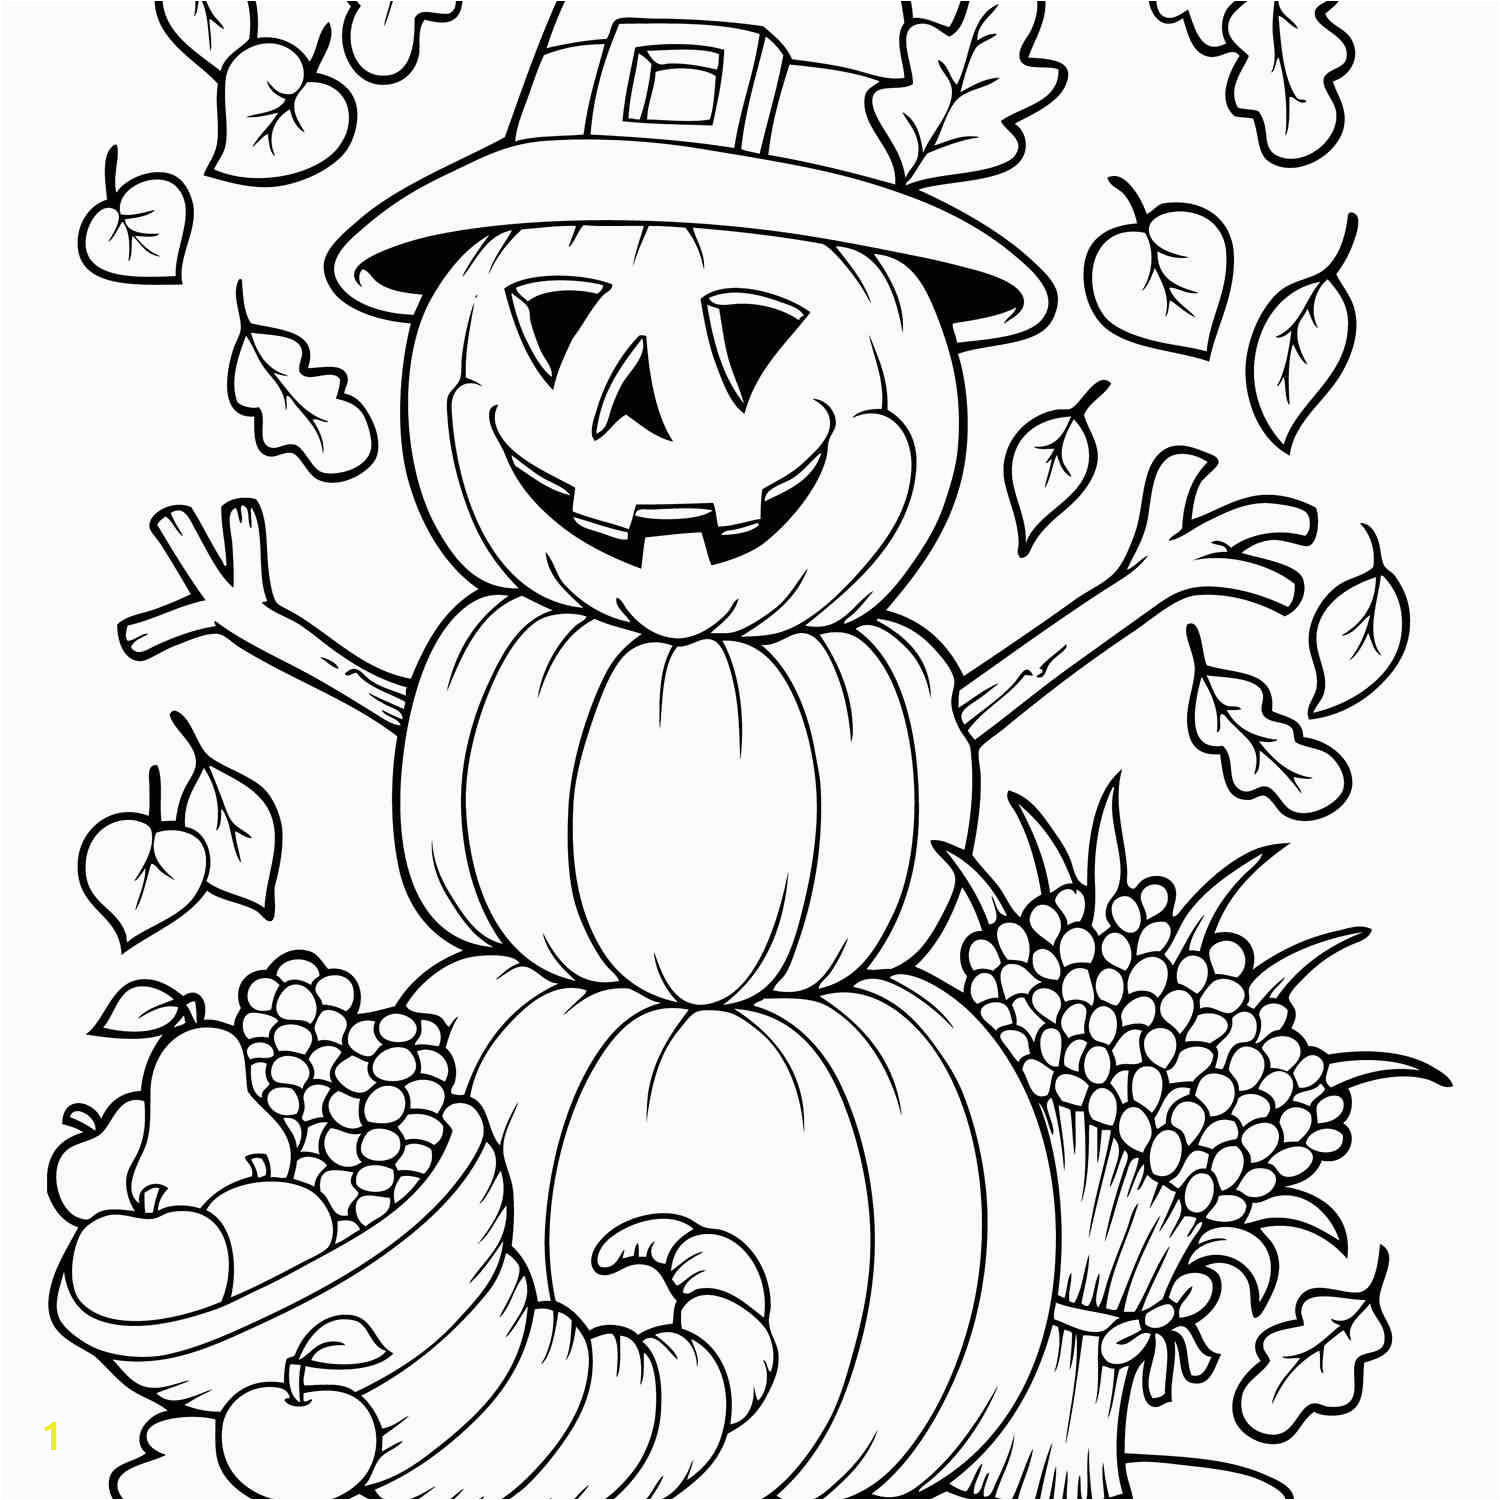 Fall Coloring Pages from Primary Games